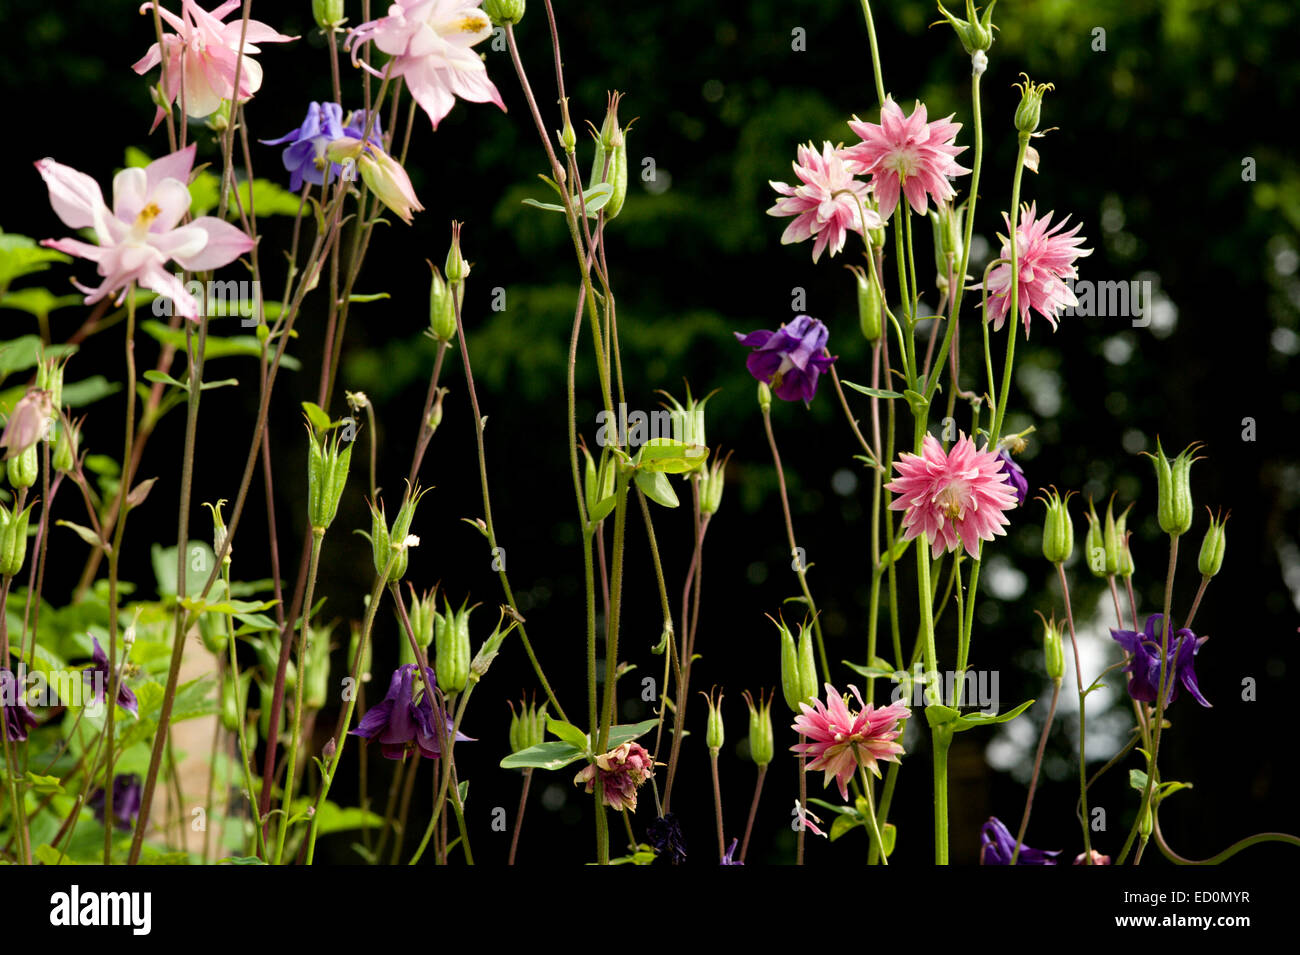 Aquilegia vulgaris, Columbine, Granny’s Bonnet growing in a Scottish garden within the Cairngorms National Park Stock Photo